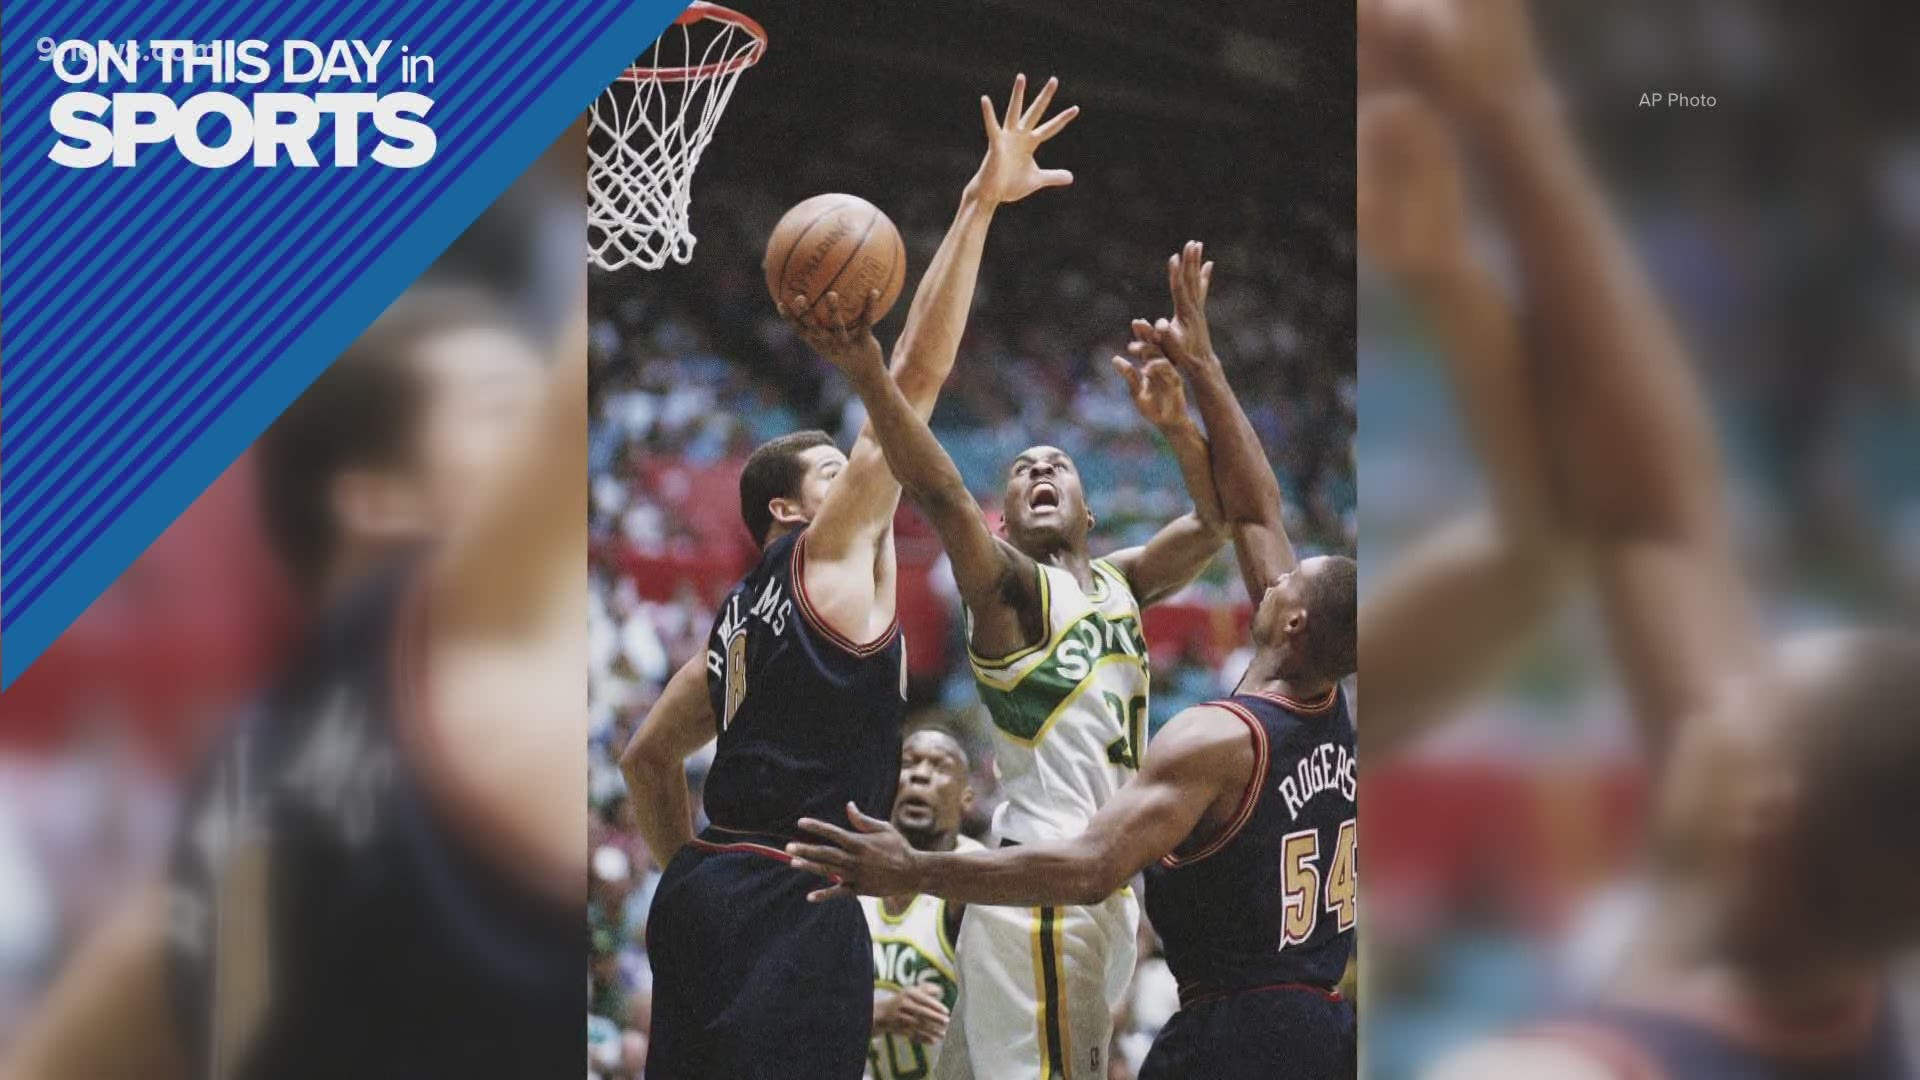 On May 7, 1994, center Dikembe Mutombo would lead the Denver Nuggets over the Seattle Supersonics in the NBA playoffs, becoming the first 8-seed to beat a 1-seed.